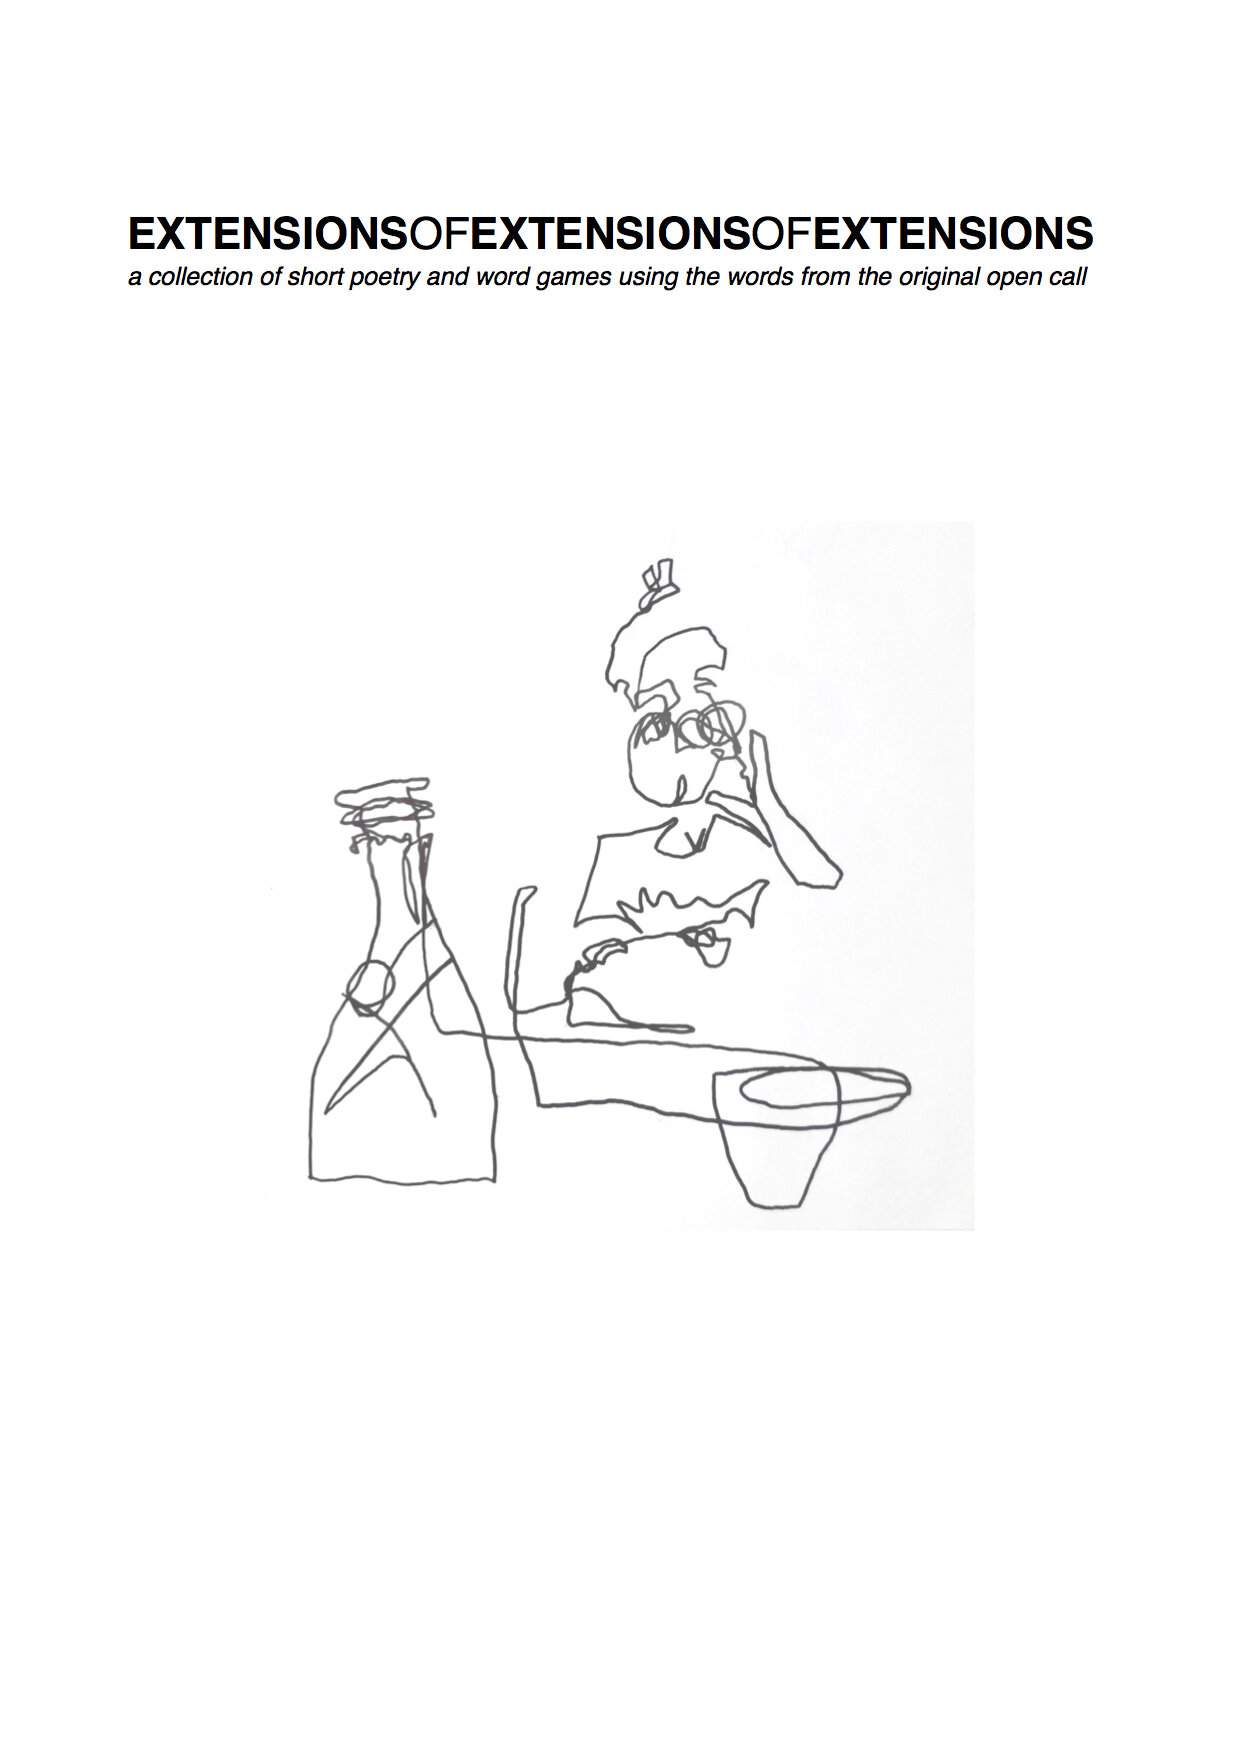  Text on white background reads ‘EXTENSIONS OF EXTENSIONS OF EXTENSIONS - a collection of short poetry and word games using the original words from the open call’. Below is an abstract line drawing of a person, bottle and mug 